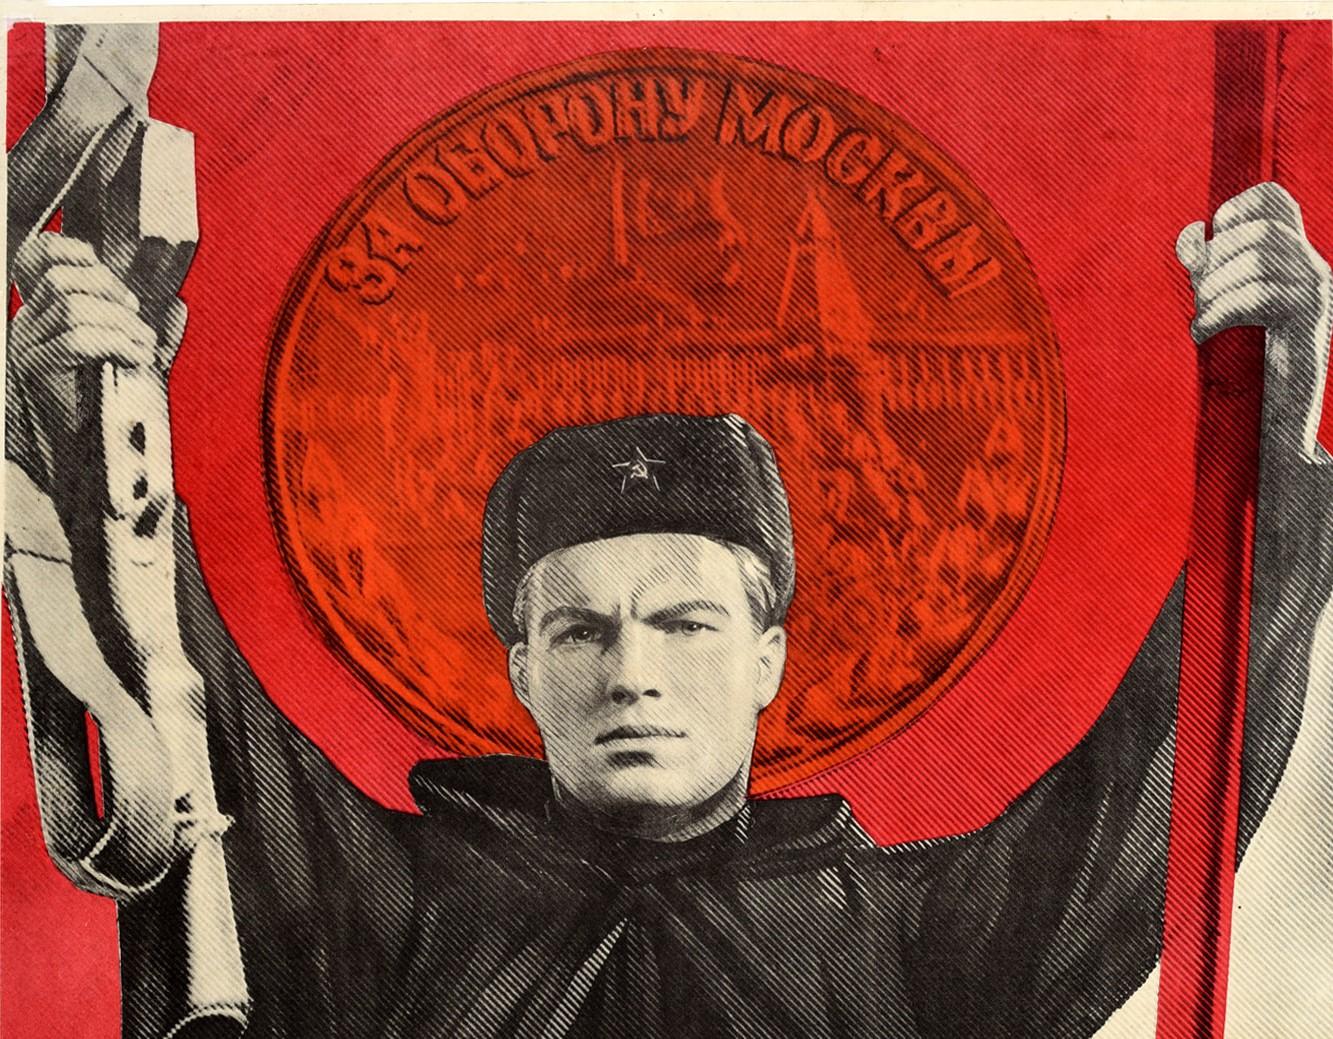 Original vintage Soviet propaganda poster for the 25th anniversary of the destruction of Fascist Troops in the battle of Moscow featuring a dynamic image in shades of black and white of a soldier wearing a military cloak over his uniform and a hat